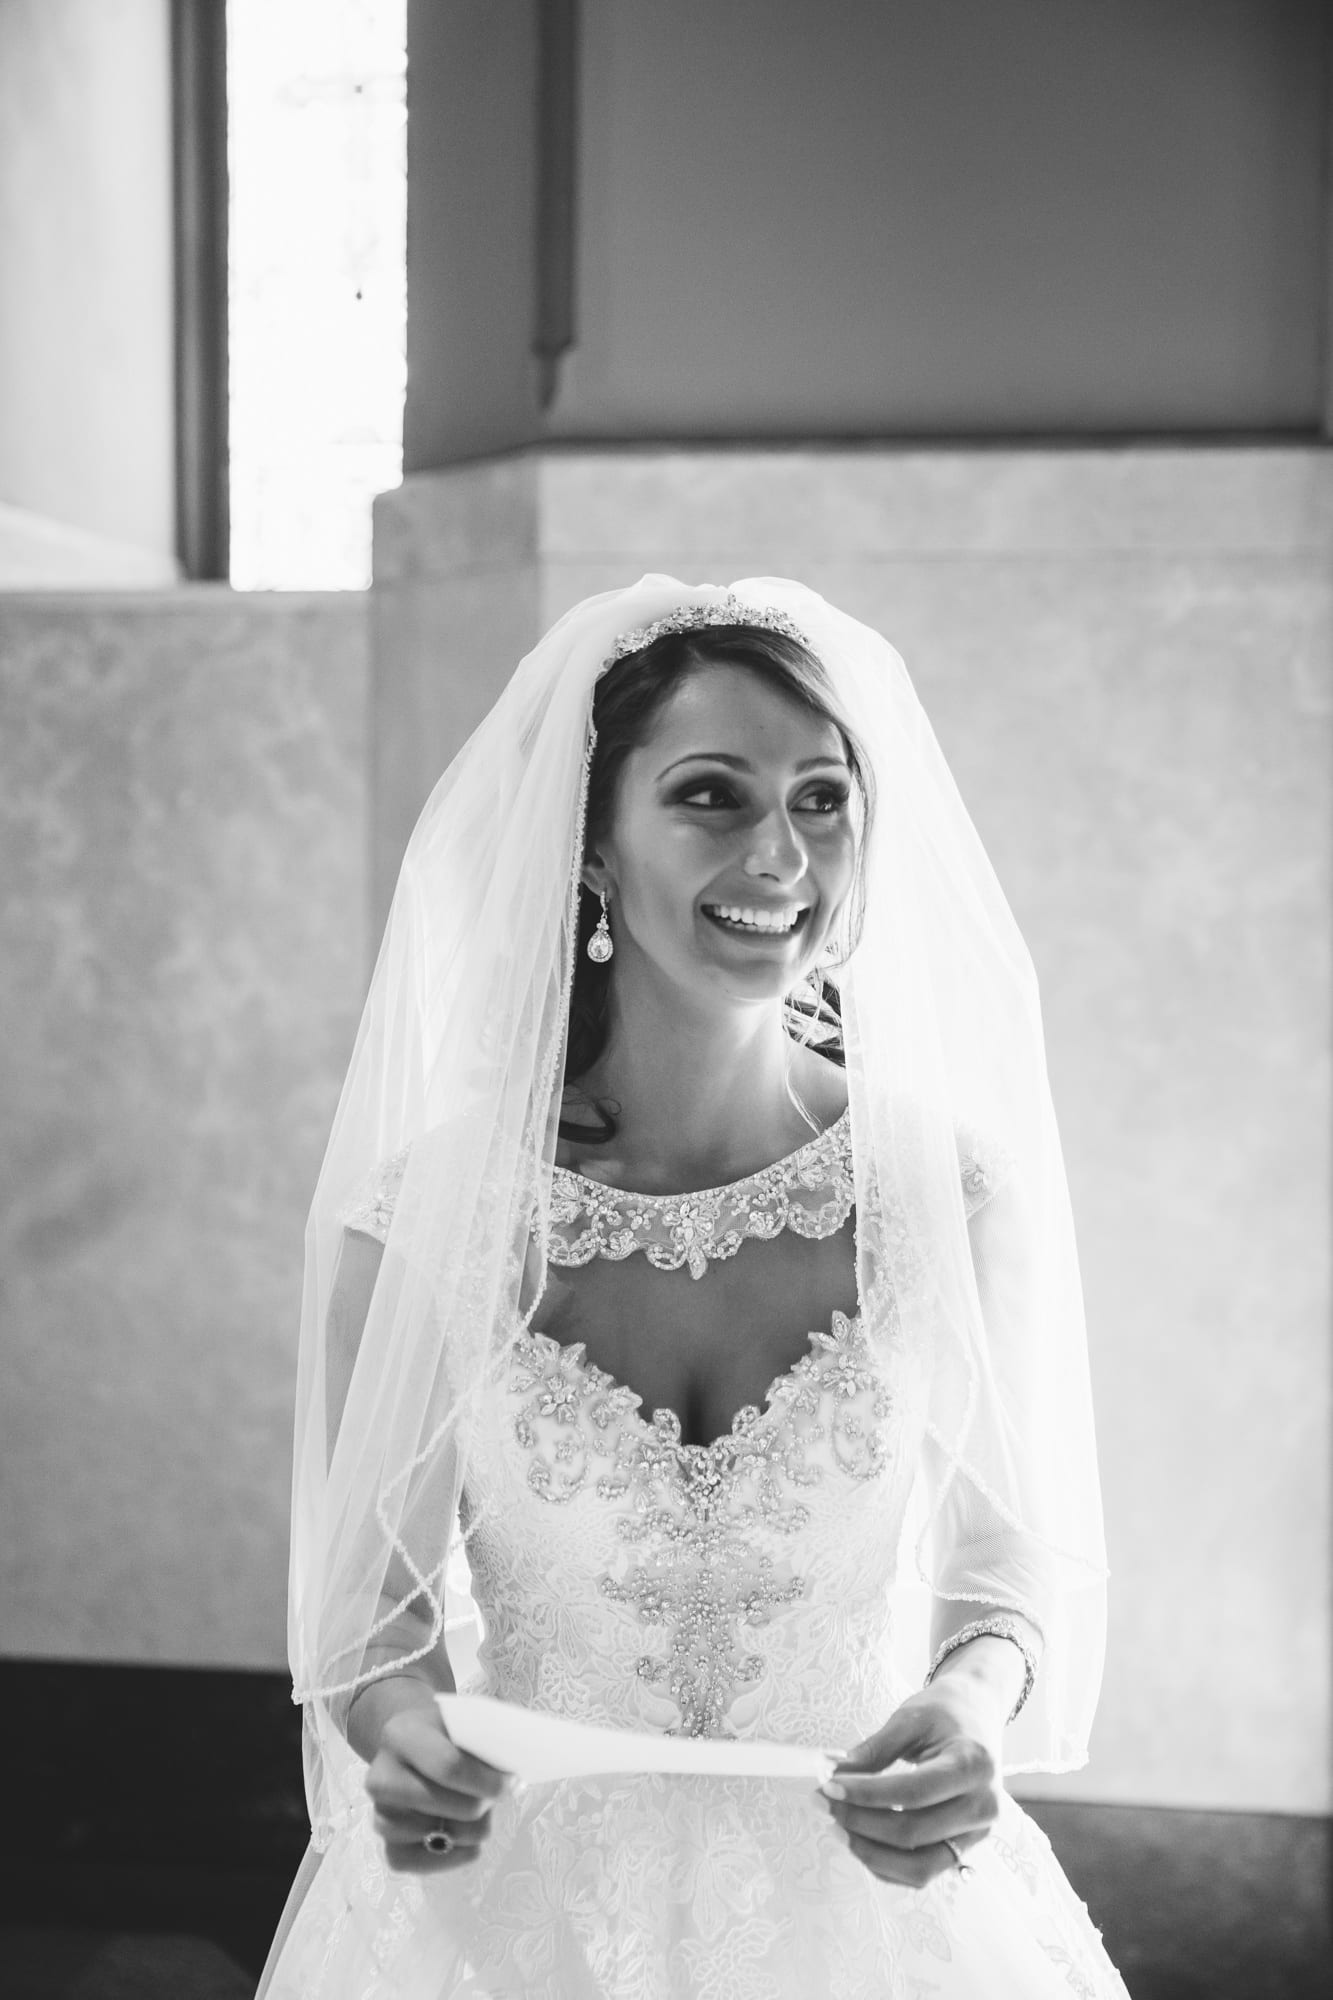 A documentary portrait of a bride smiling moments before she walks down the aisle of the Cathedral of the Holy Cross during her State Room Wedding in Boston, Massachusetts